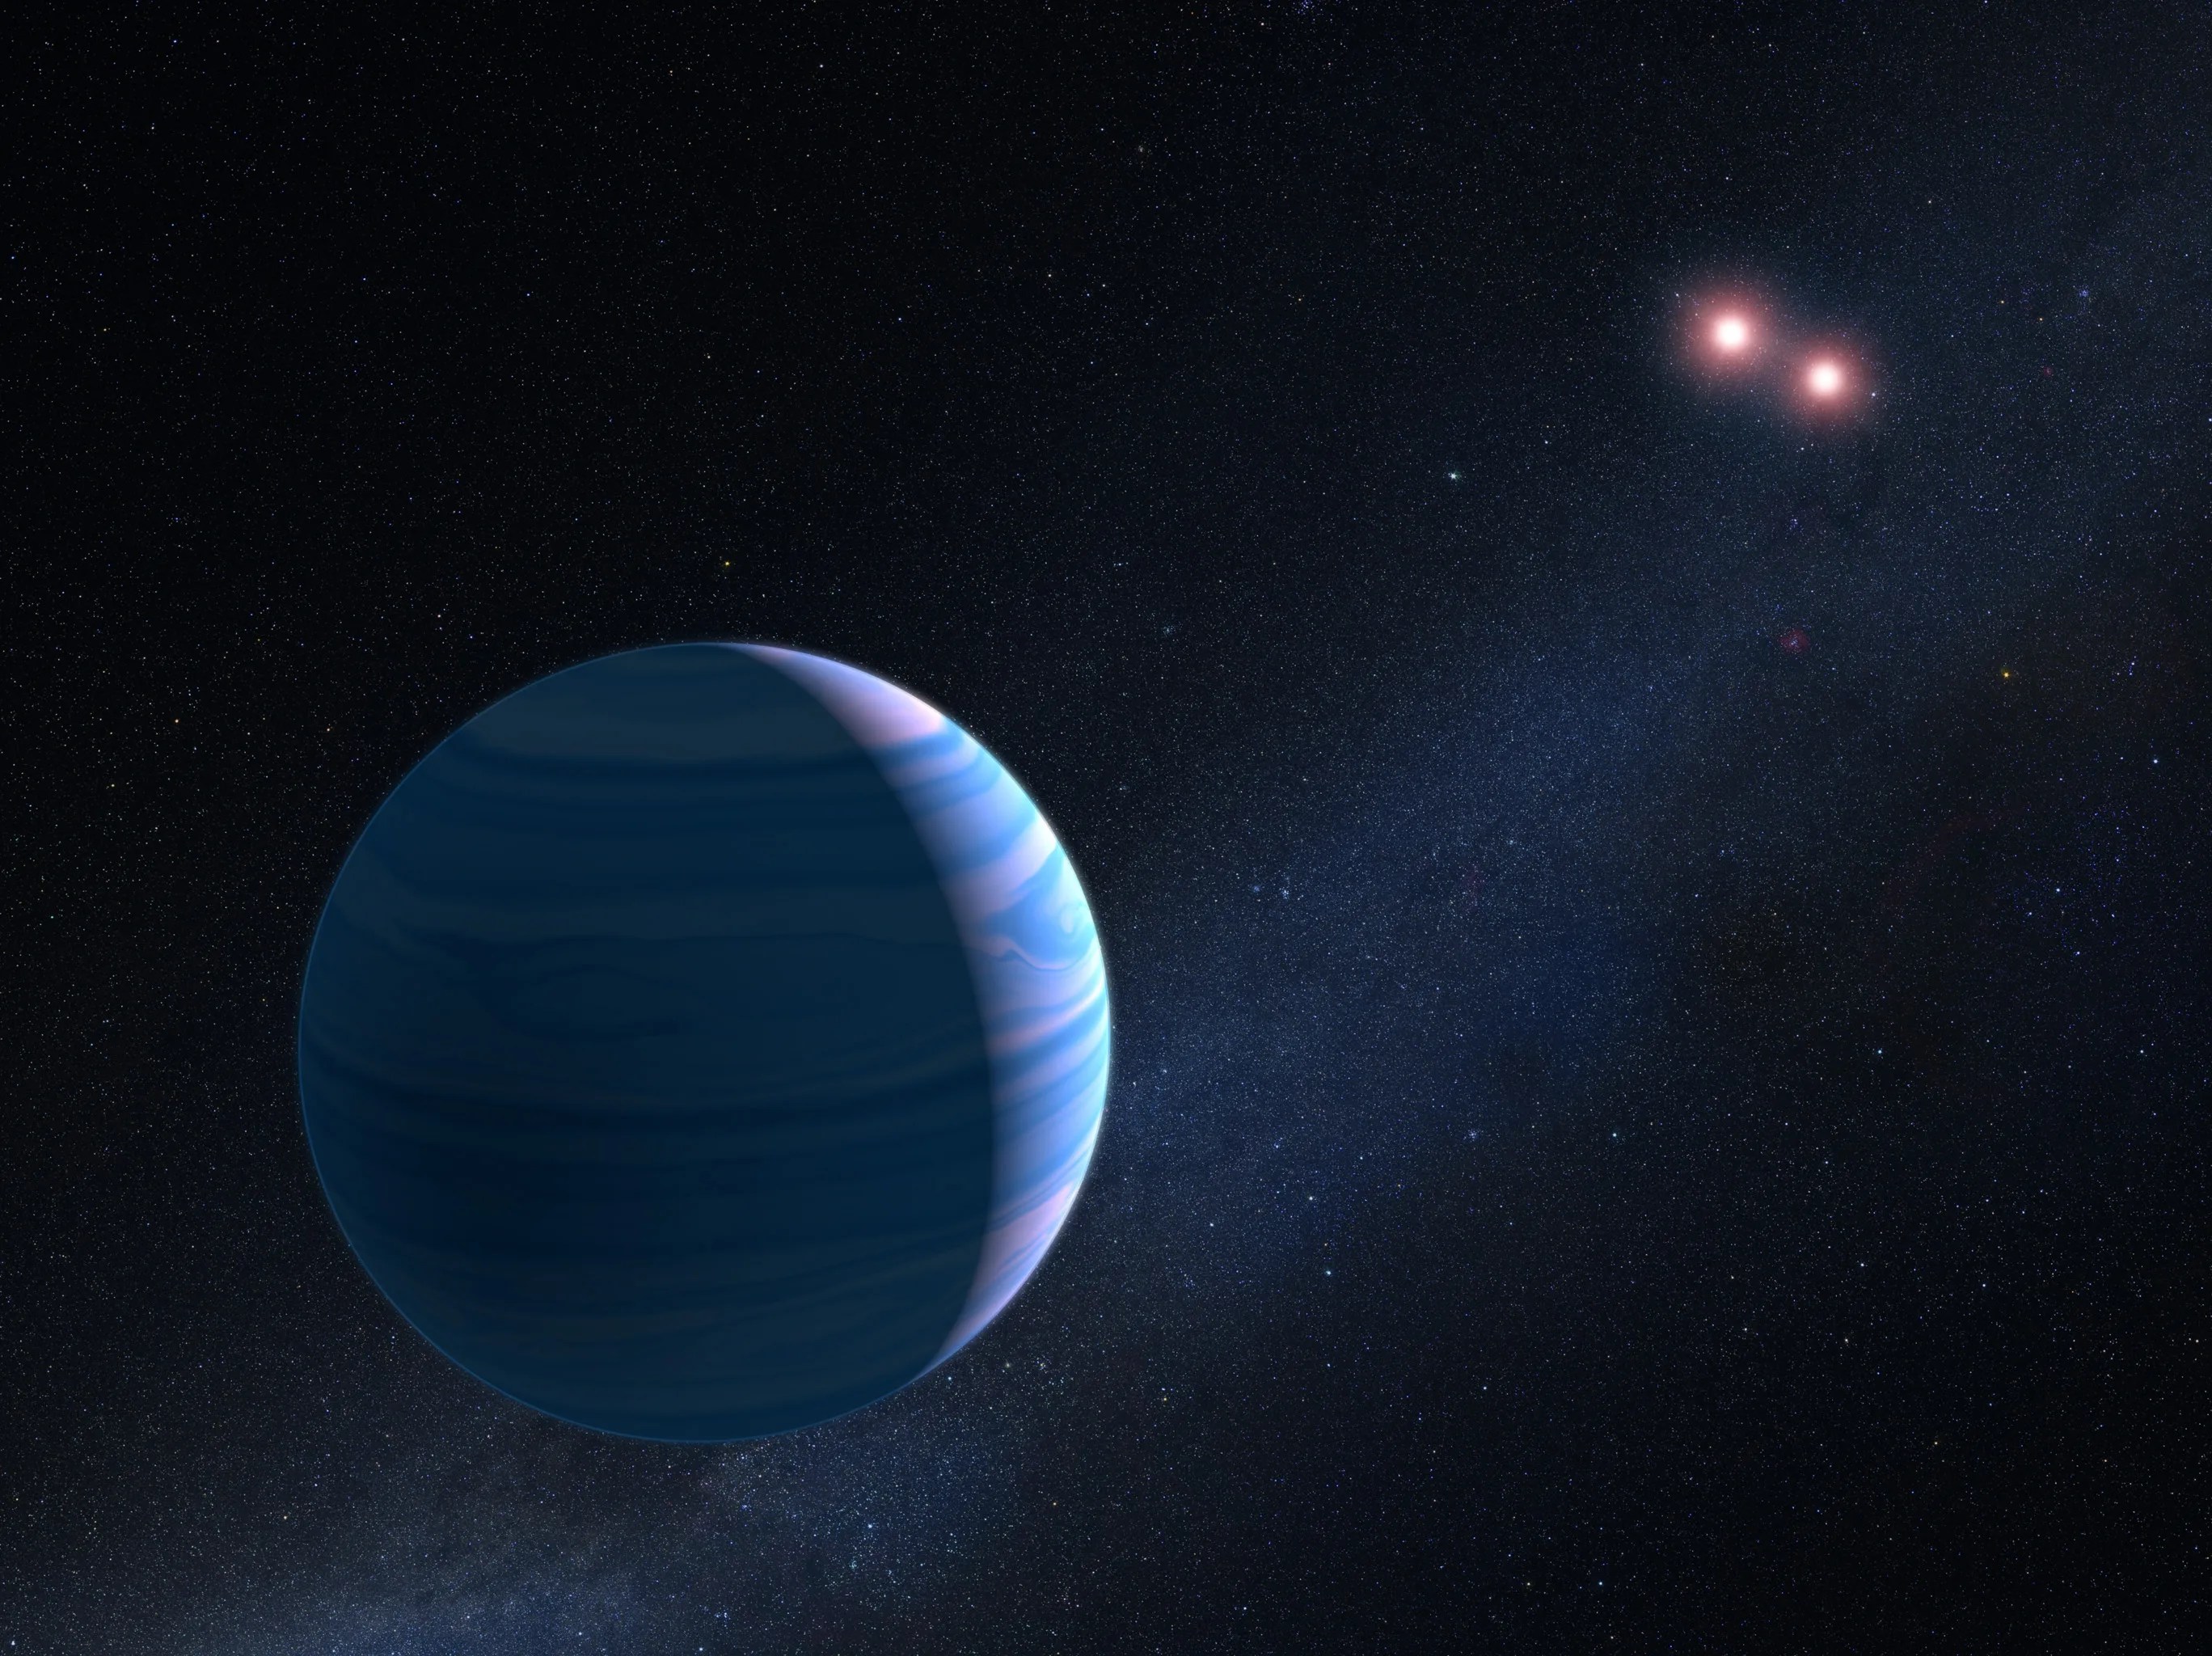 Artist concept of a gas giant planet circling a pair of red dwarf stars in the system OGLE-2007-BLG-349. The pair of red dwarf stars is in the upper right. A large blue world is at lower-left.